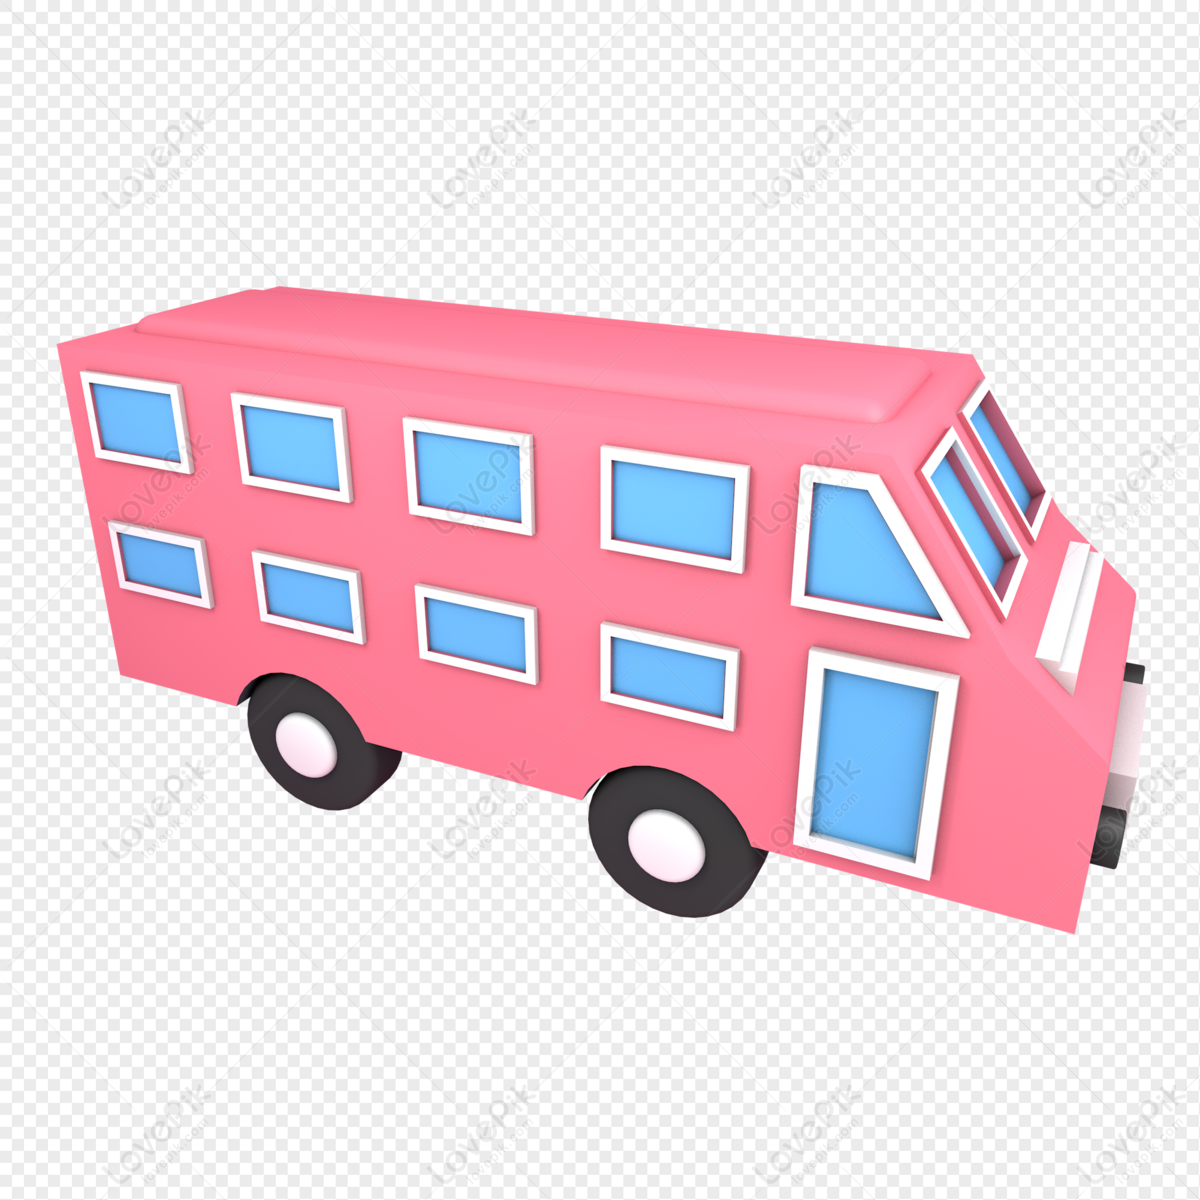 Bus Car Traffic Cartoon Car PNG Transparent Background And Clipart Image  For Free Download - Lovepik | 401556730